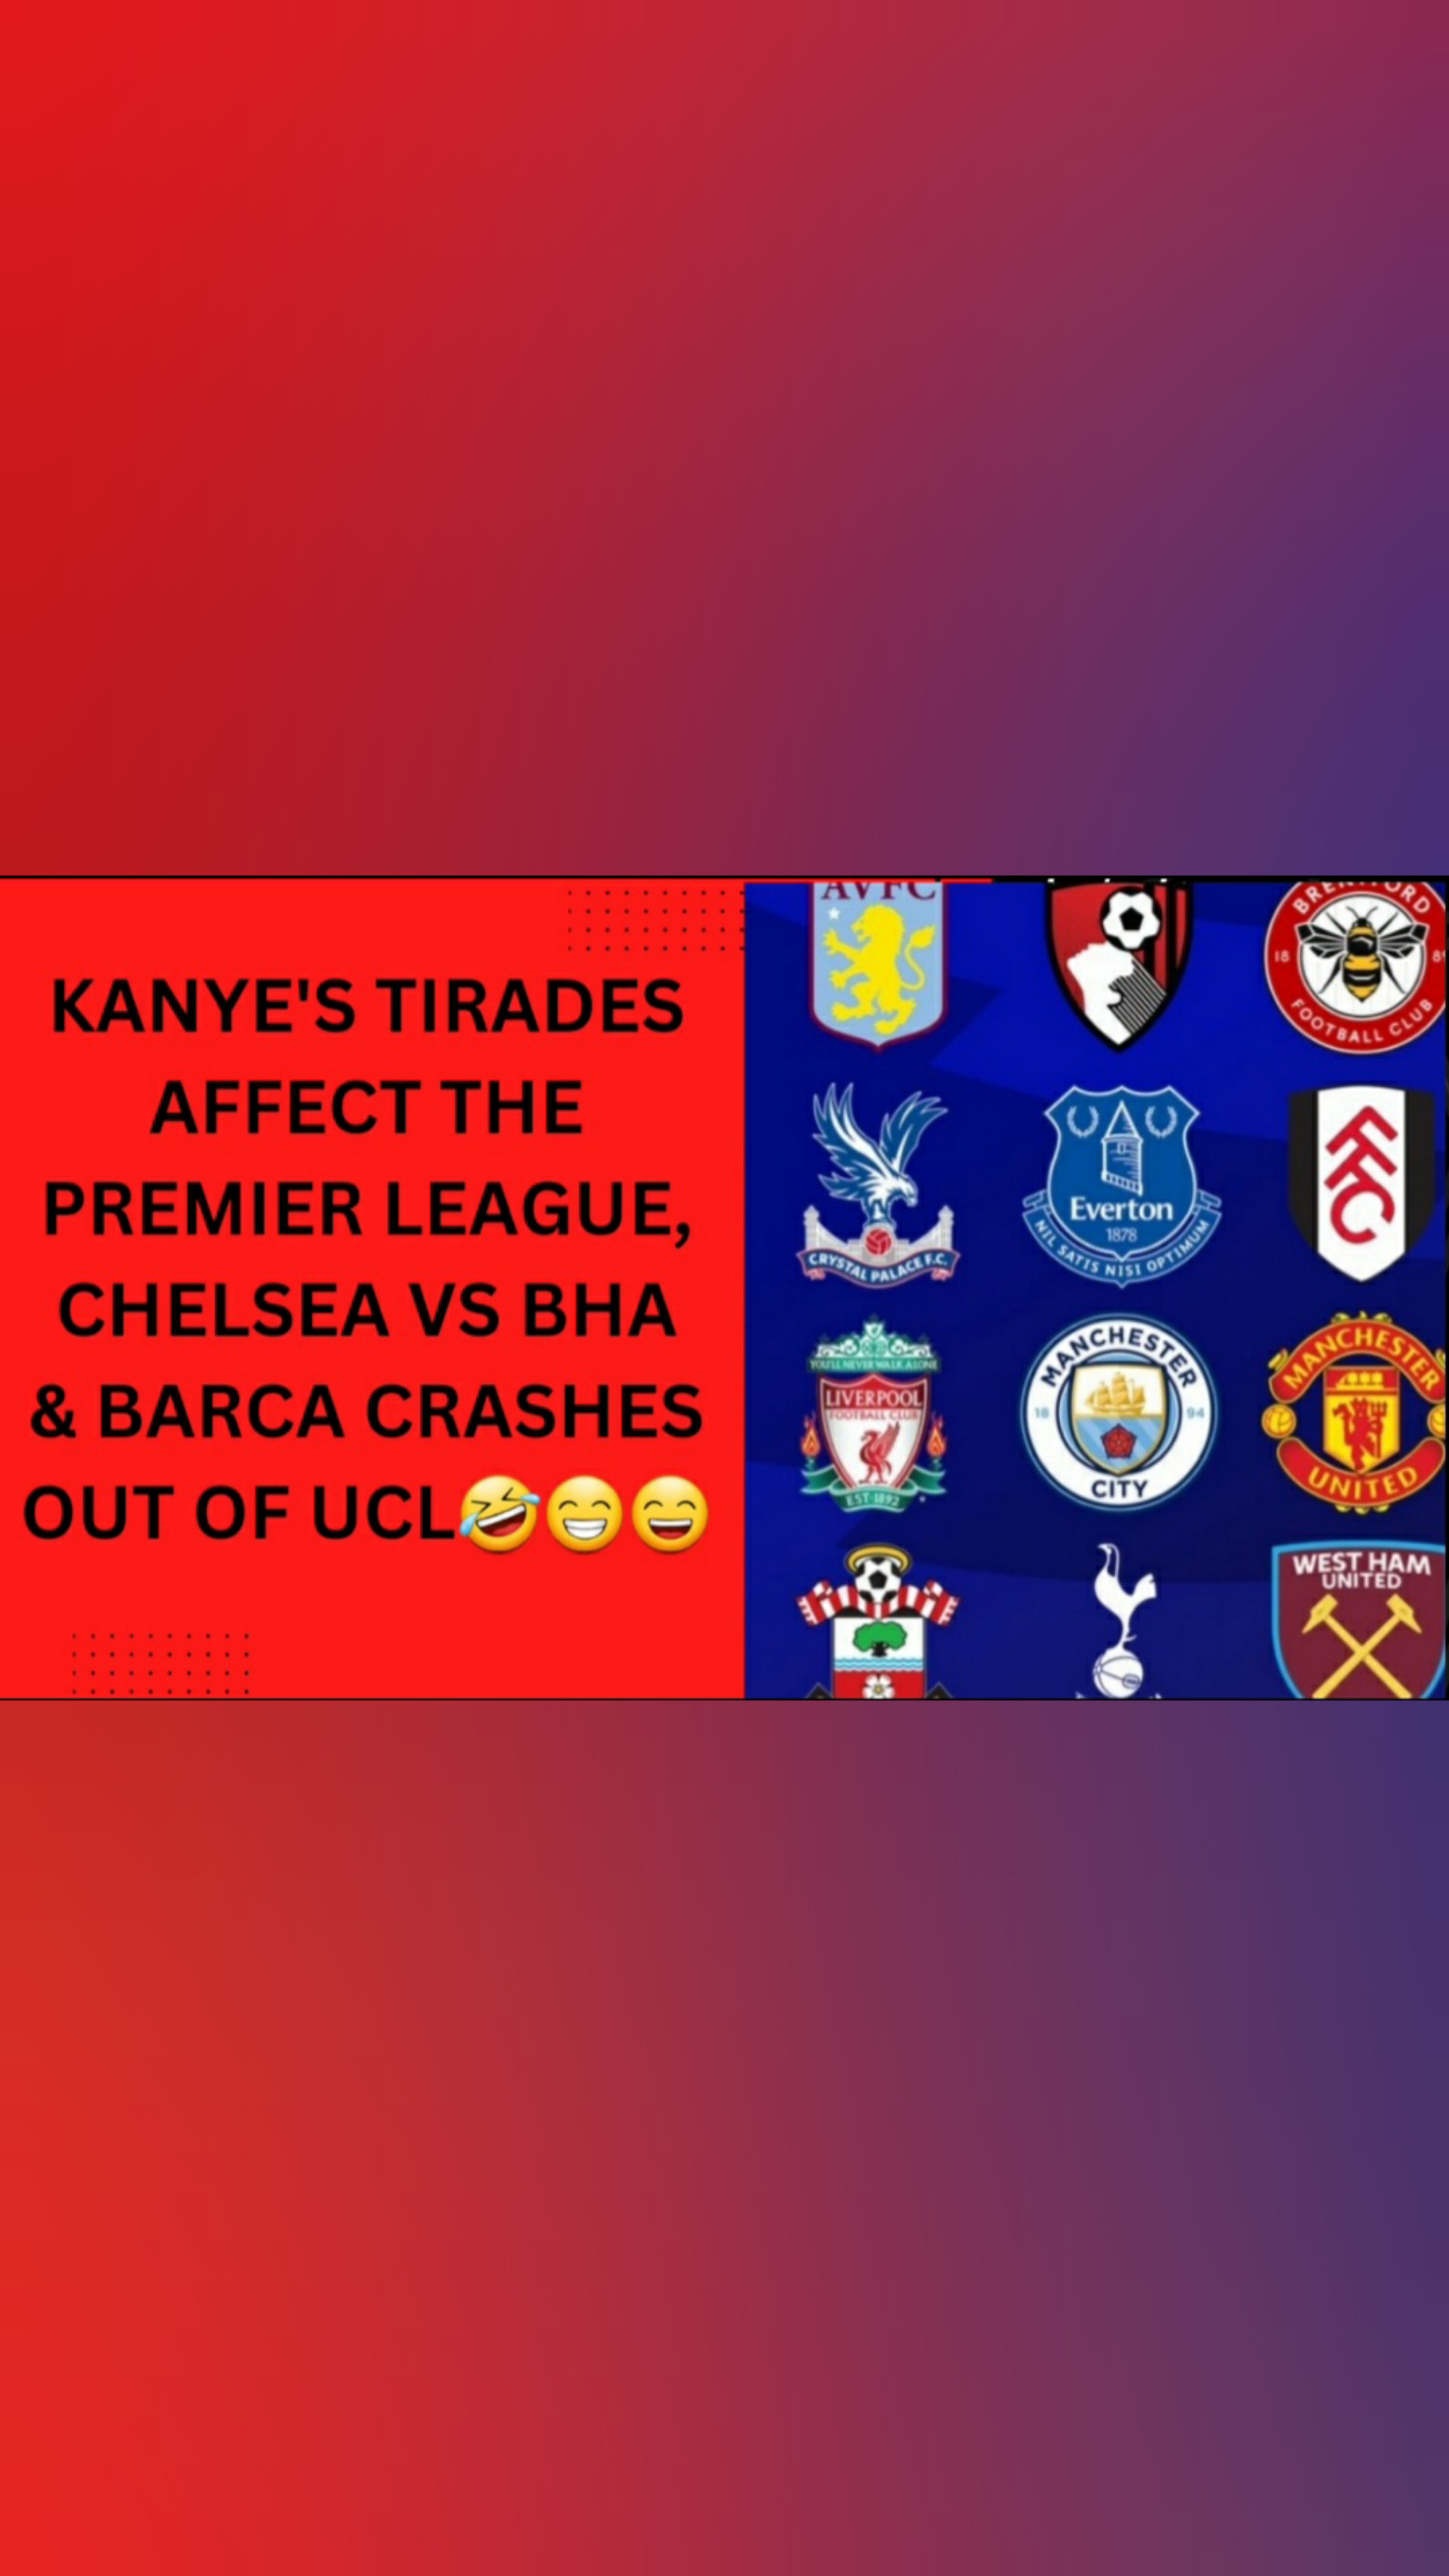 Kanye’s Tirades Affect The Premier League, Preview of Chelsea vs BHA, & Barca Falls Out of UCL😂😂🤣